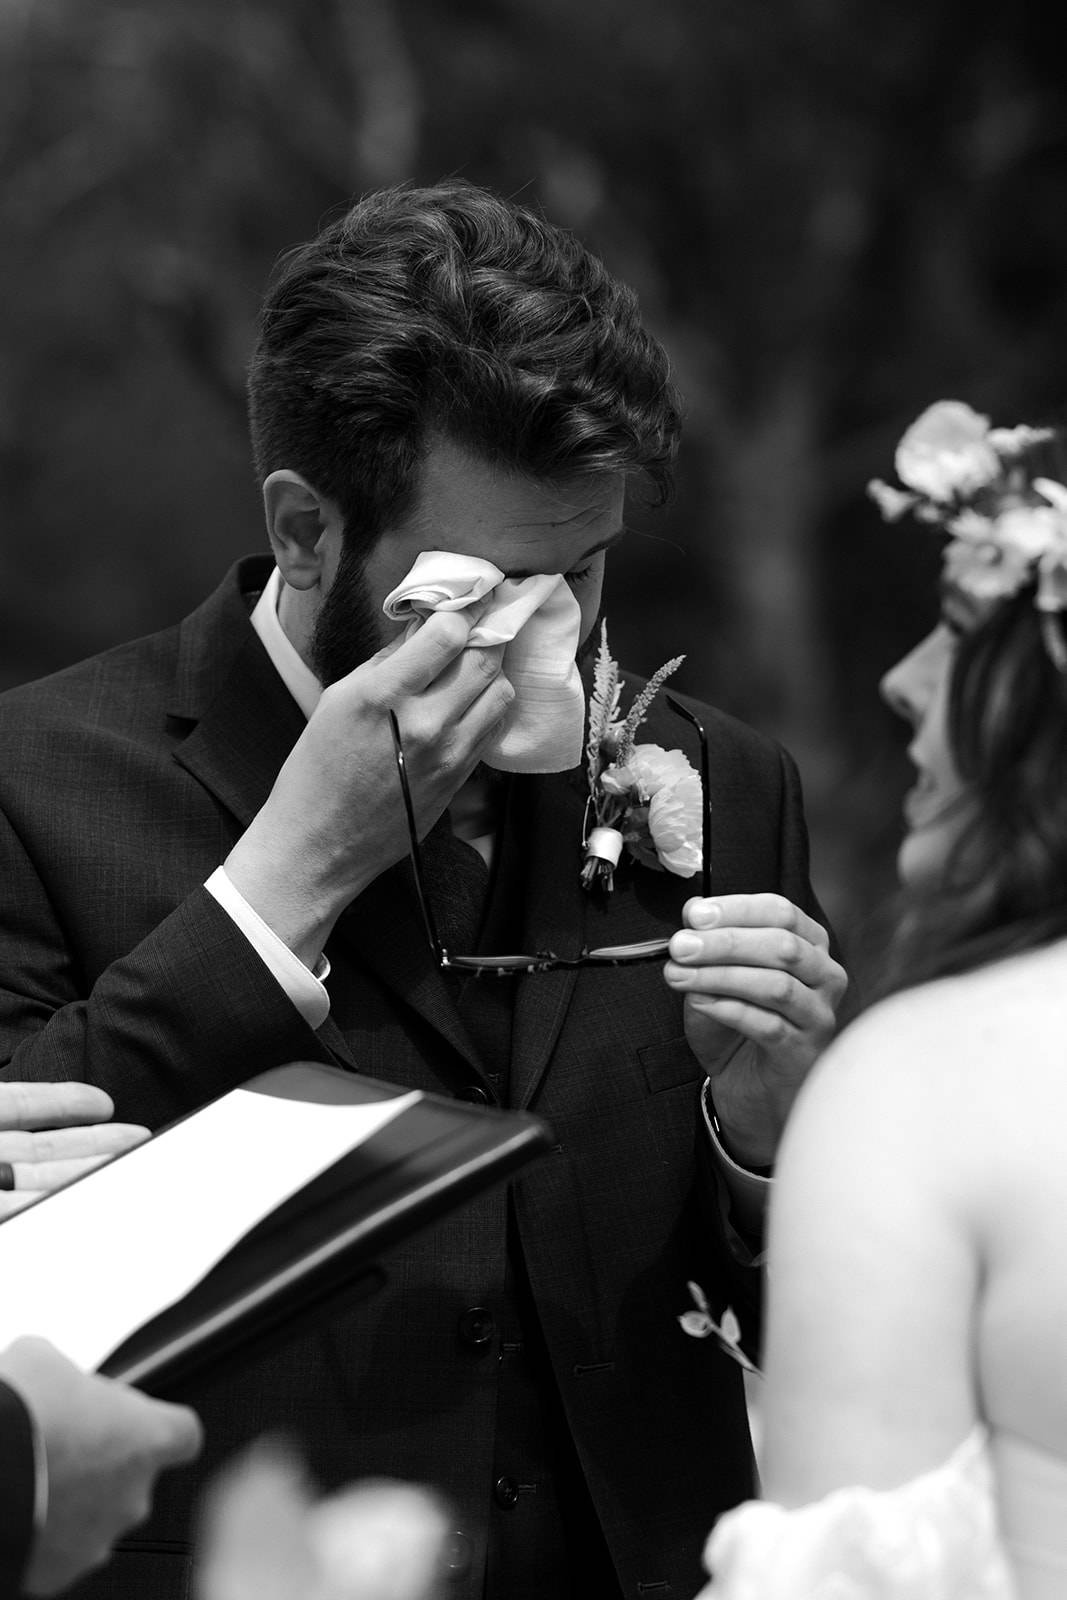 A man uses a tissue to wipe away a tear while he holds his glasses in his other hand at his wedding ceremony